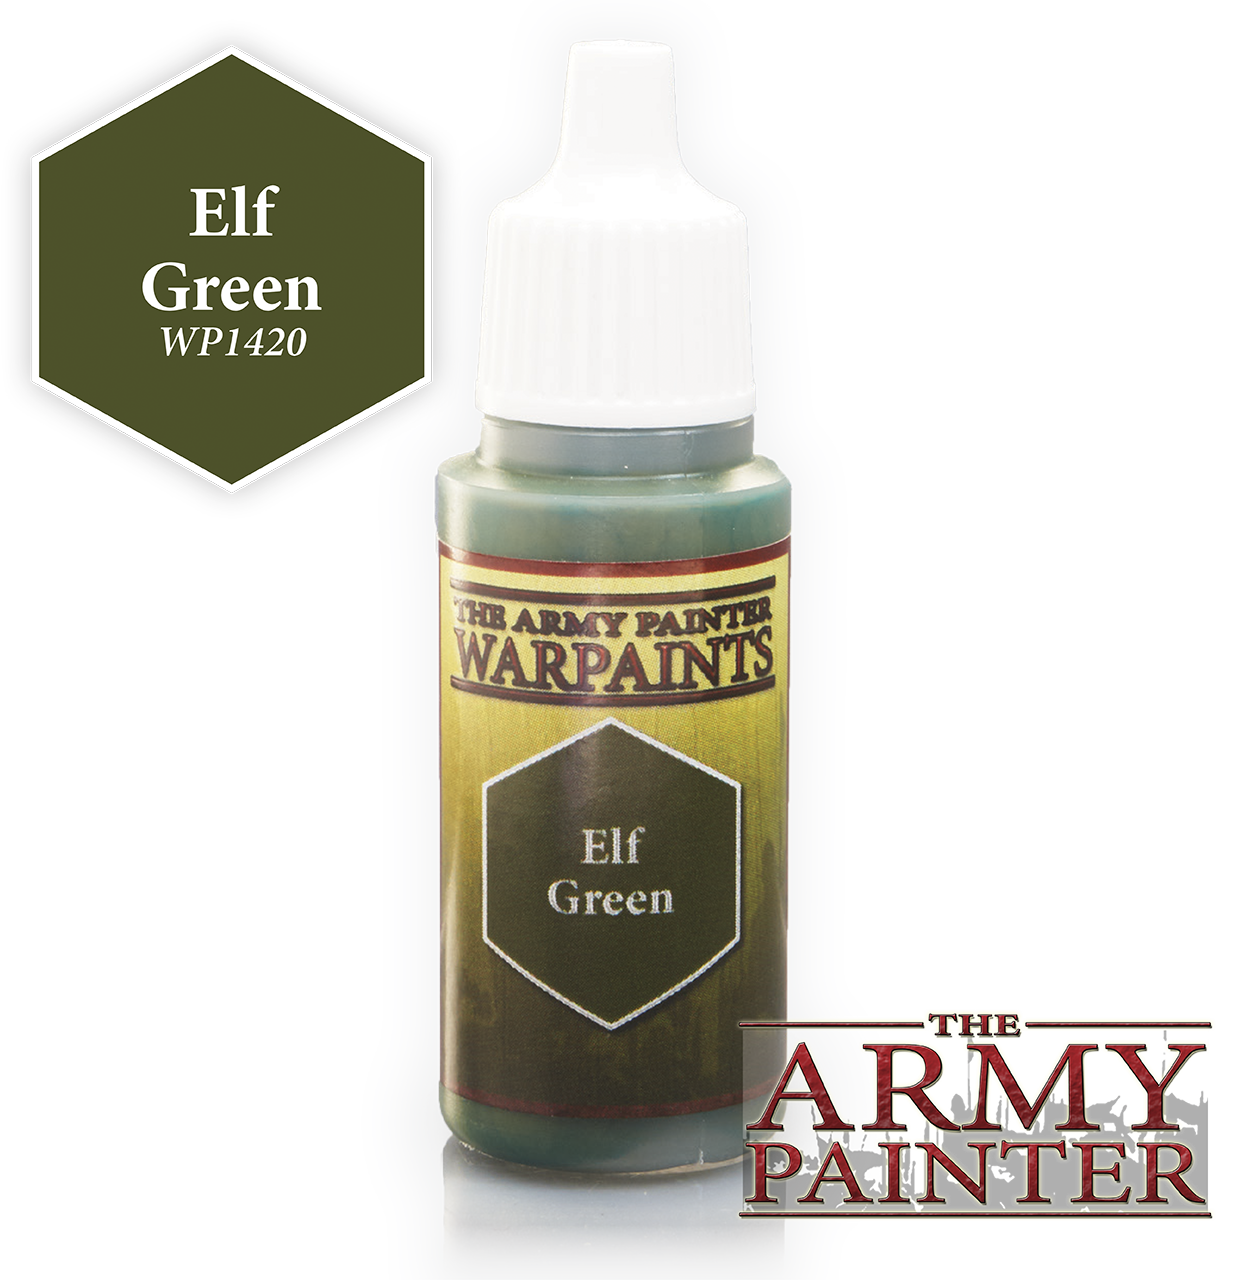 The ARMY PAINTER: Acrylics Warpaint - Elf Green | Tacoma Games